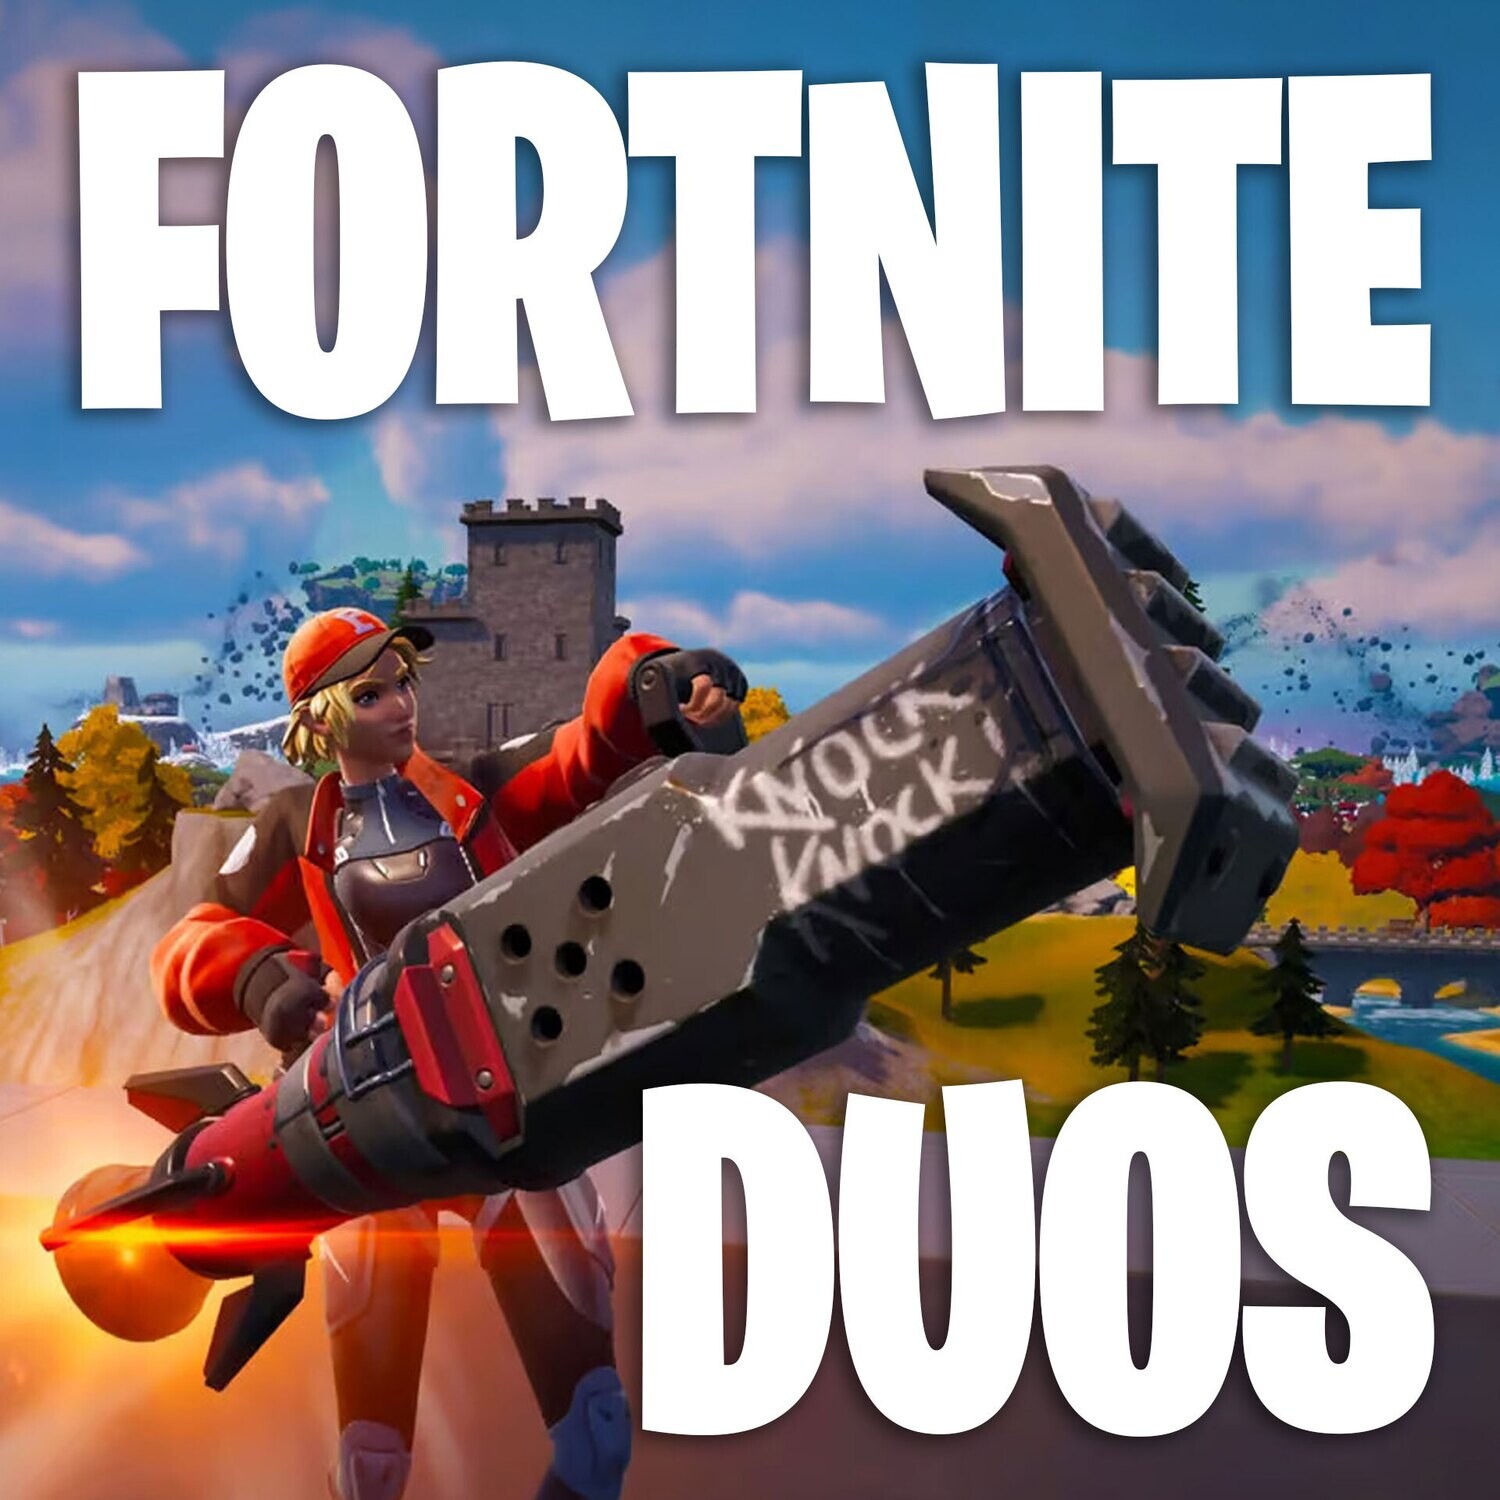 Fortnite Duos - May 4th 4pm